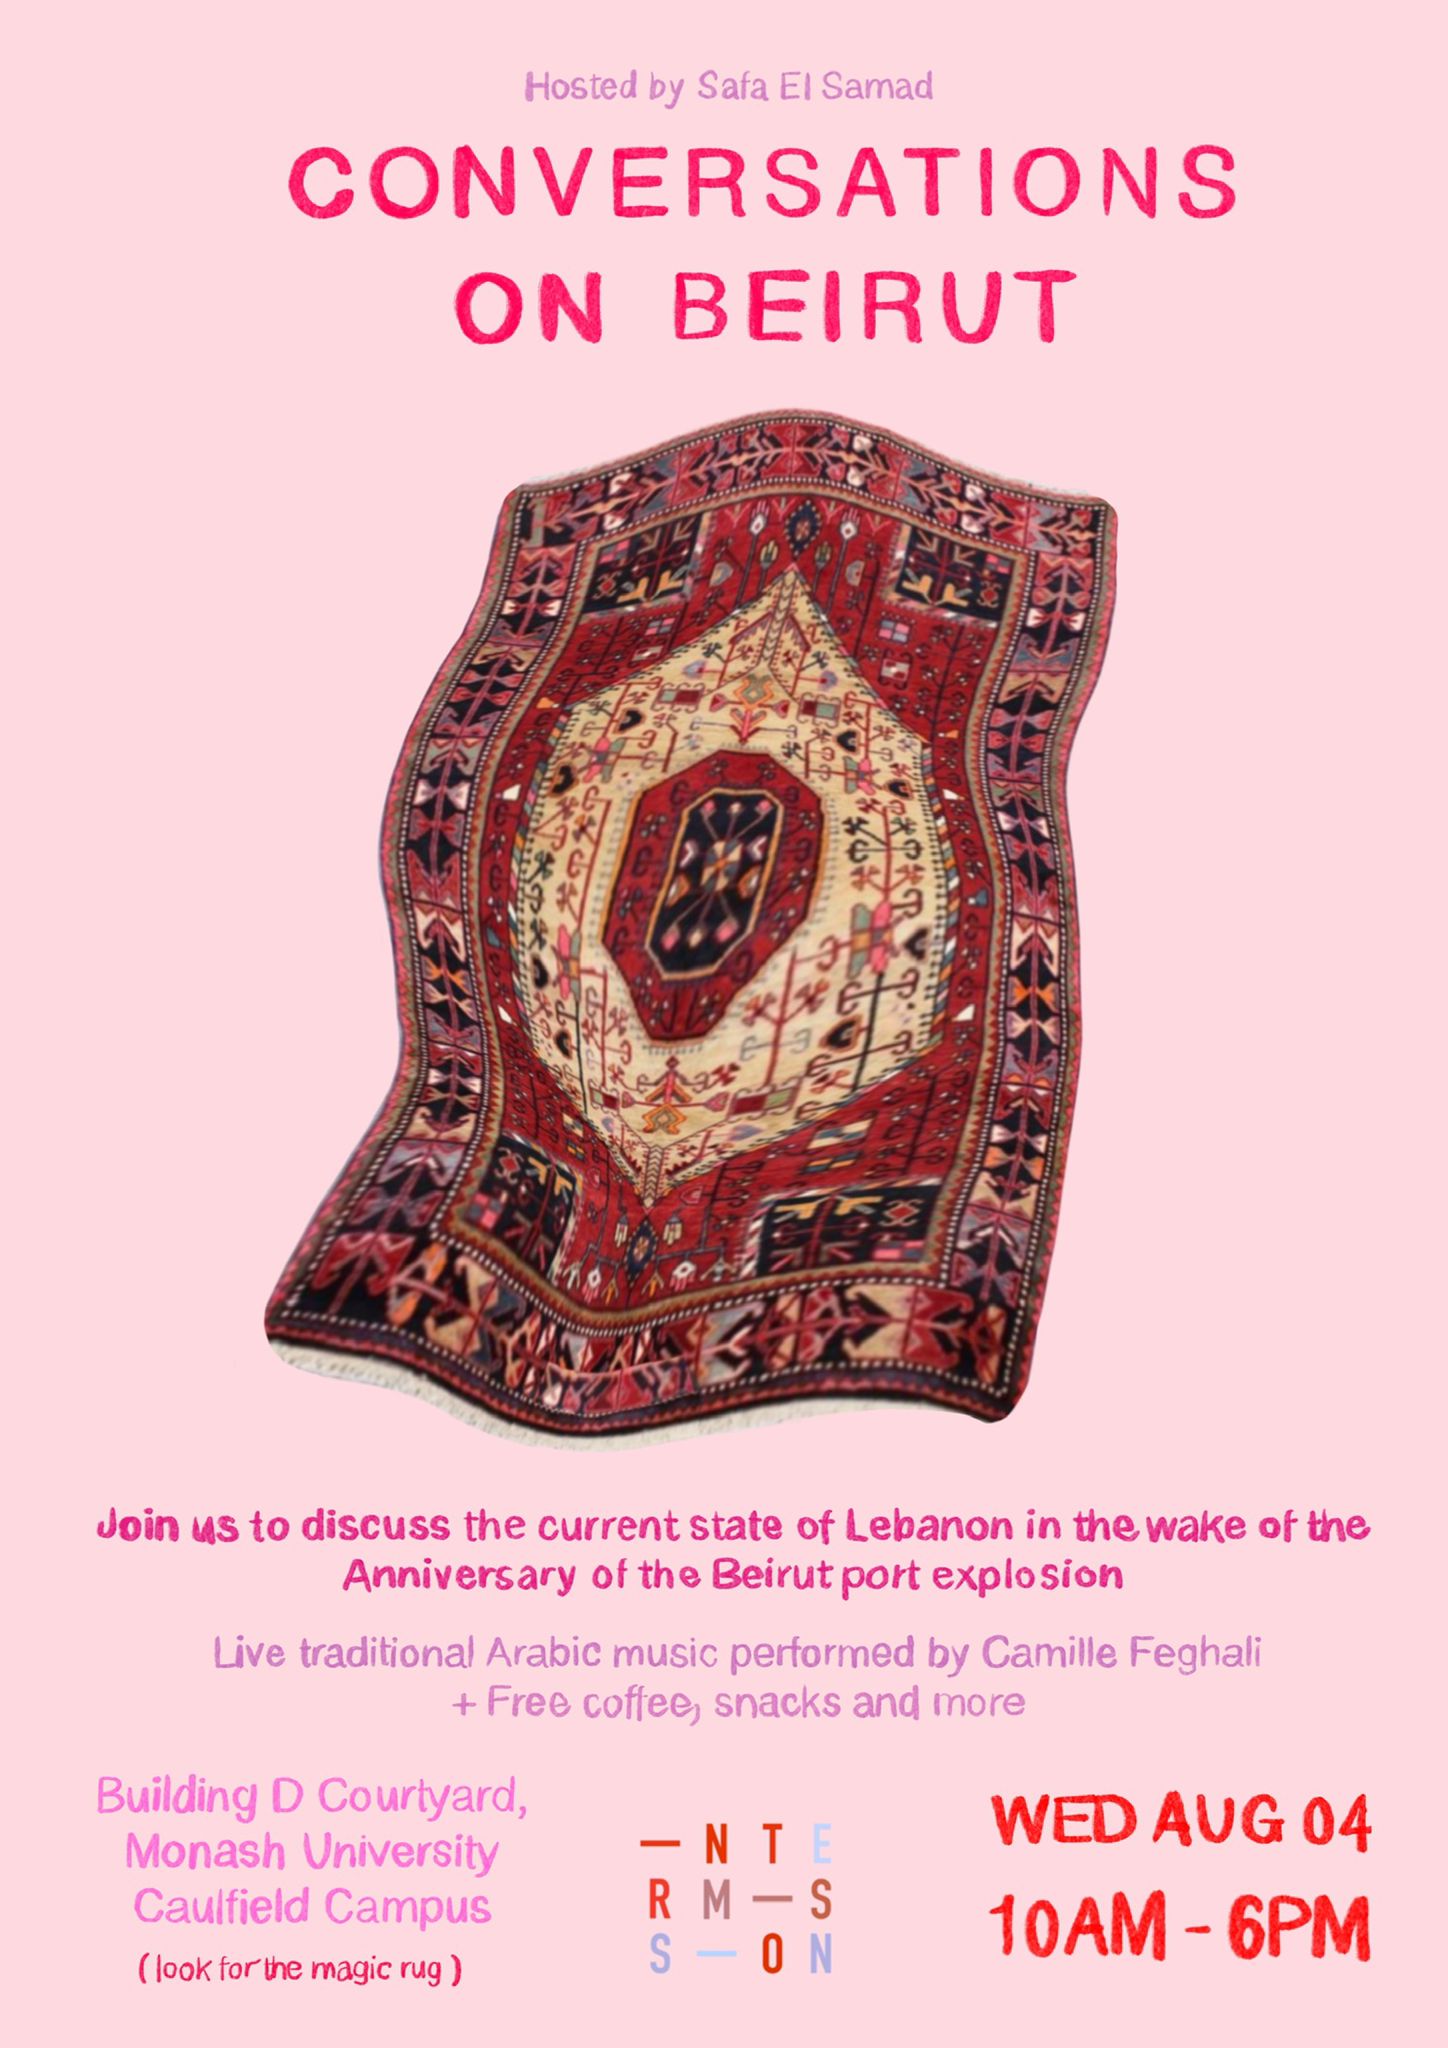 Conversations on Beirut event poster